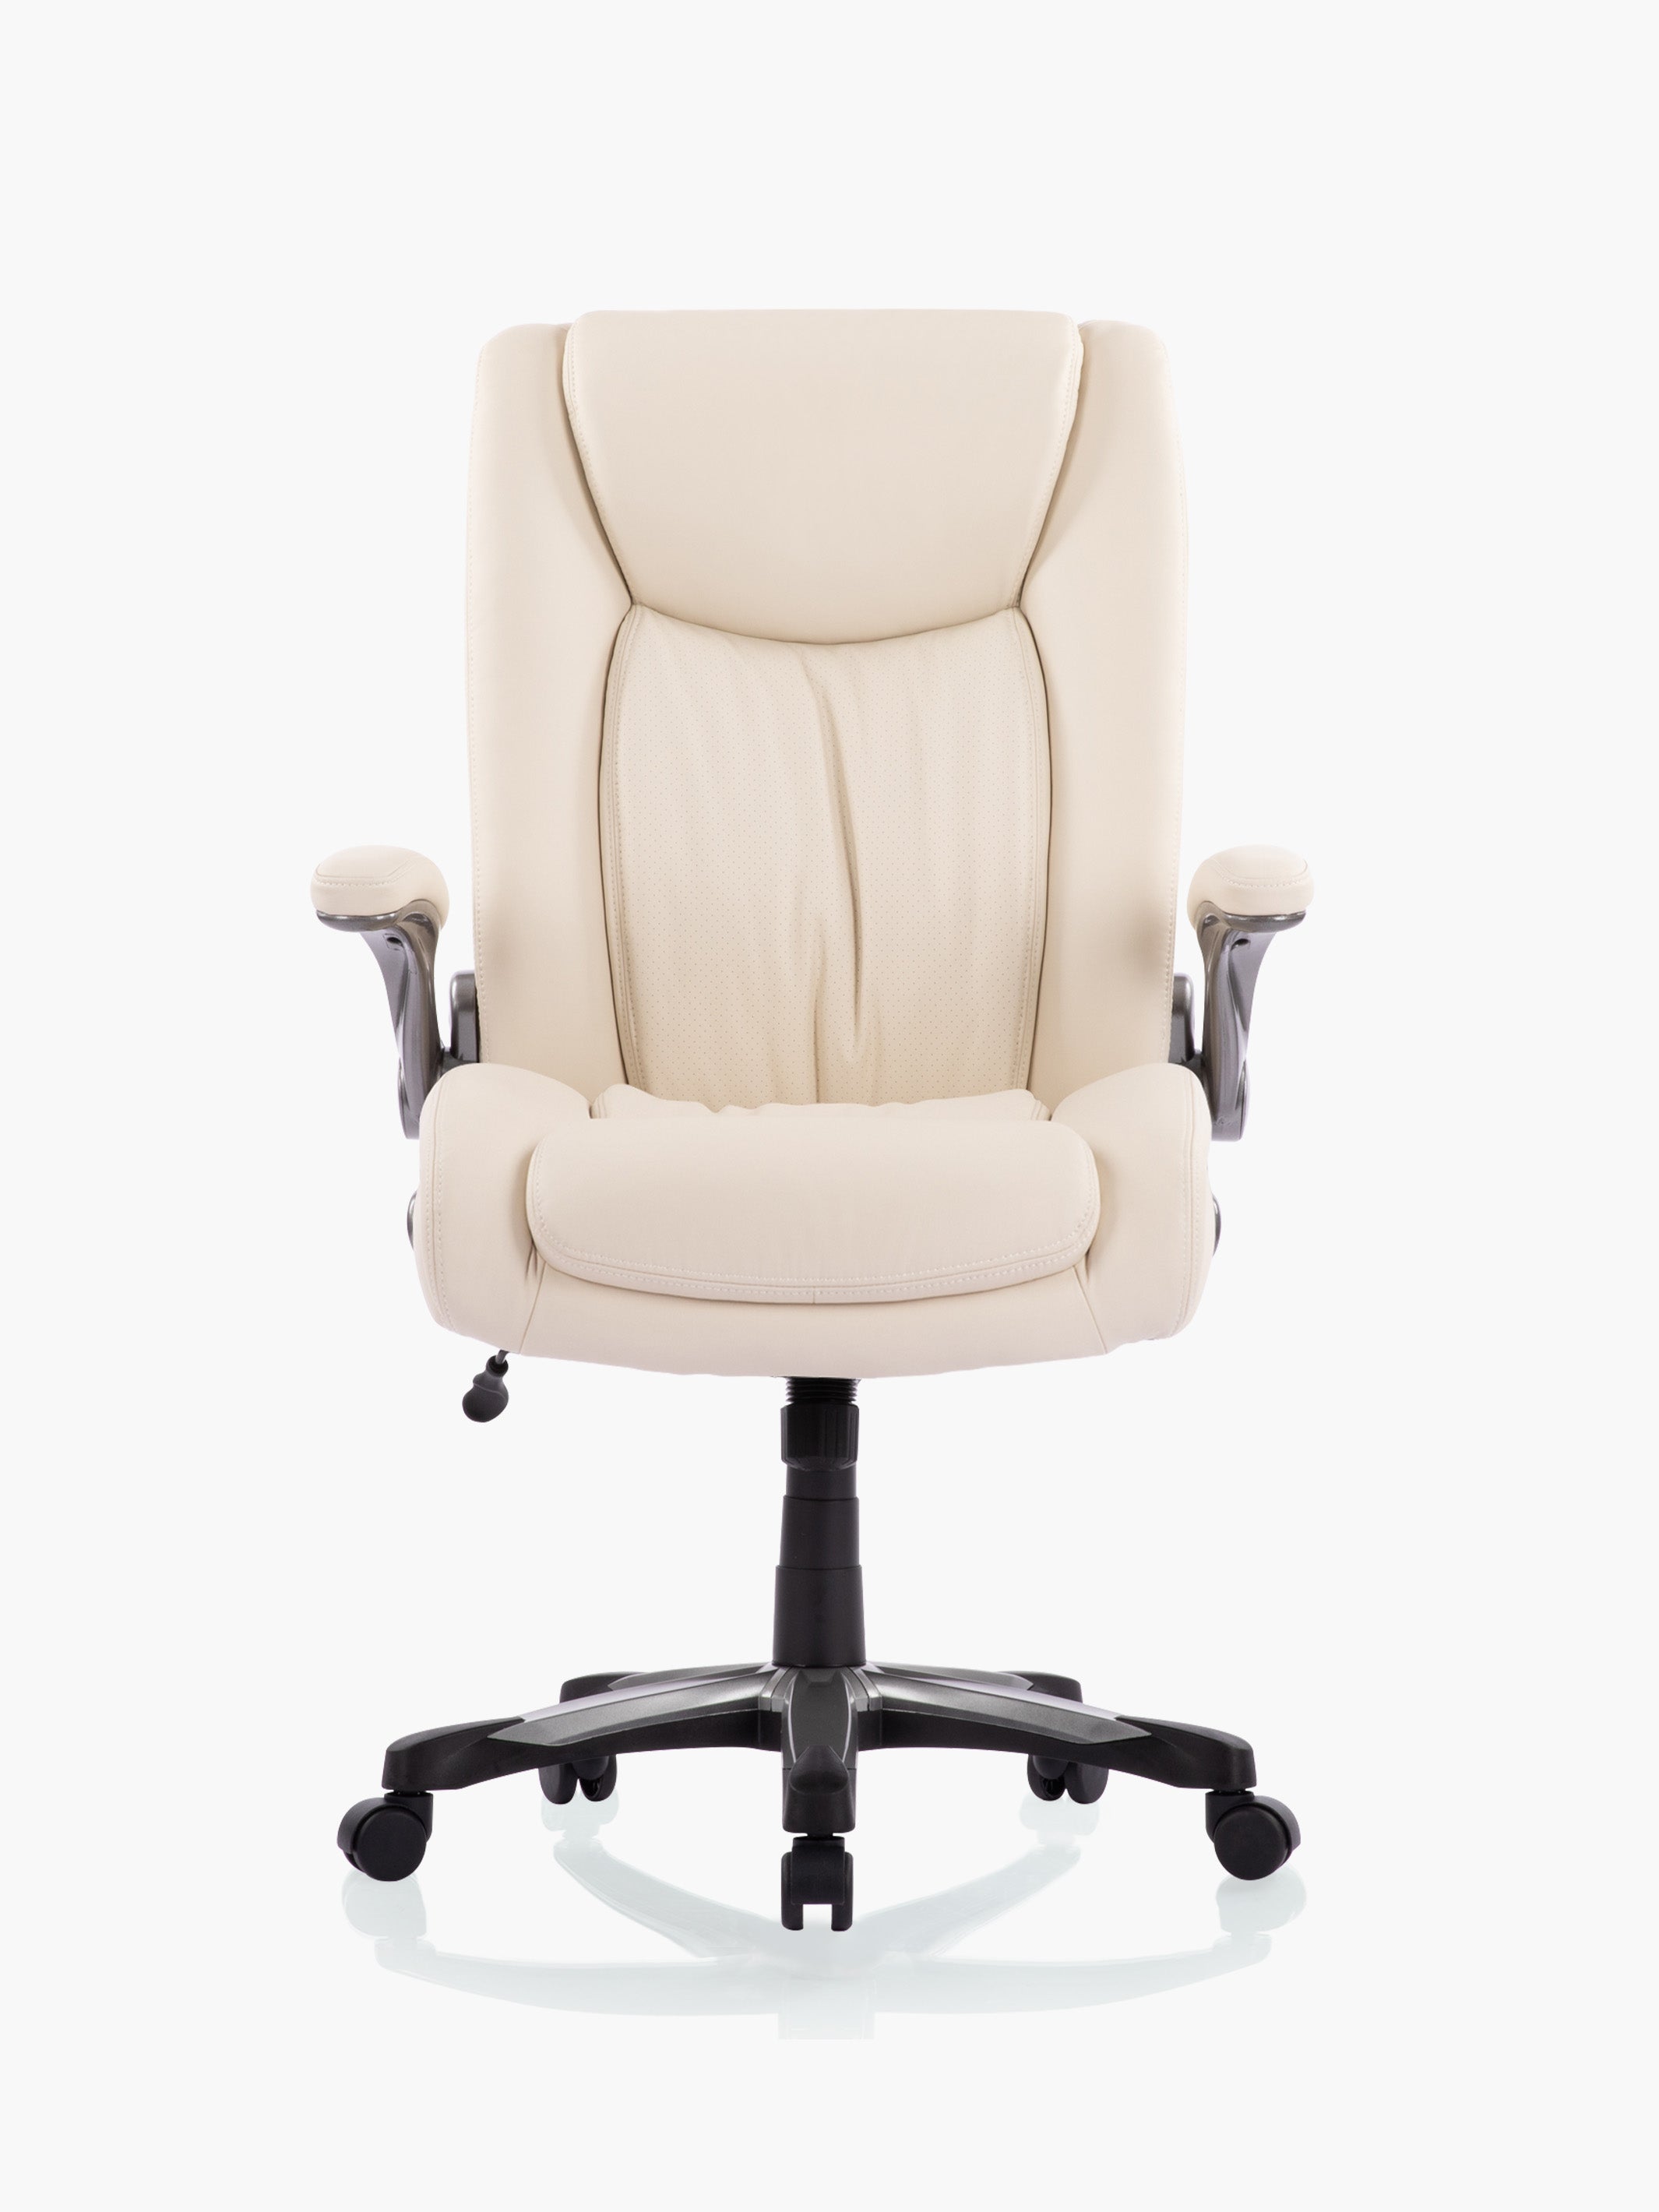 COLAMY Executive Leather Office Chair with Flip-up Armrests CL5309 in Beige #color_beige